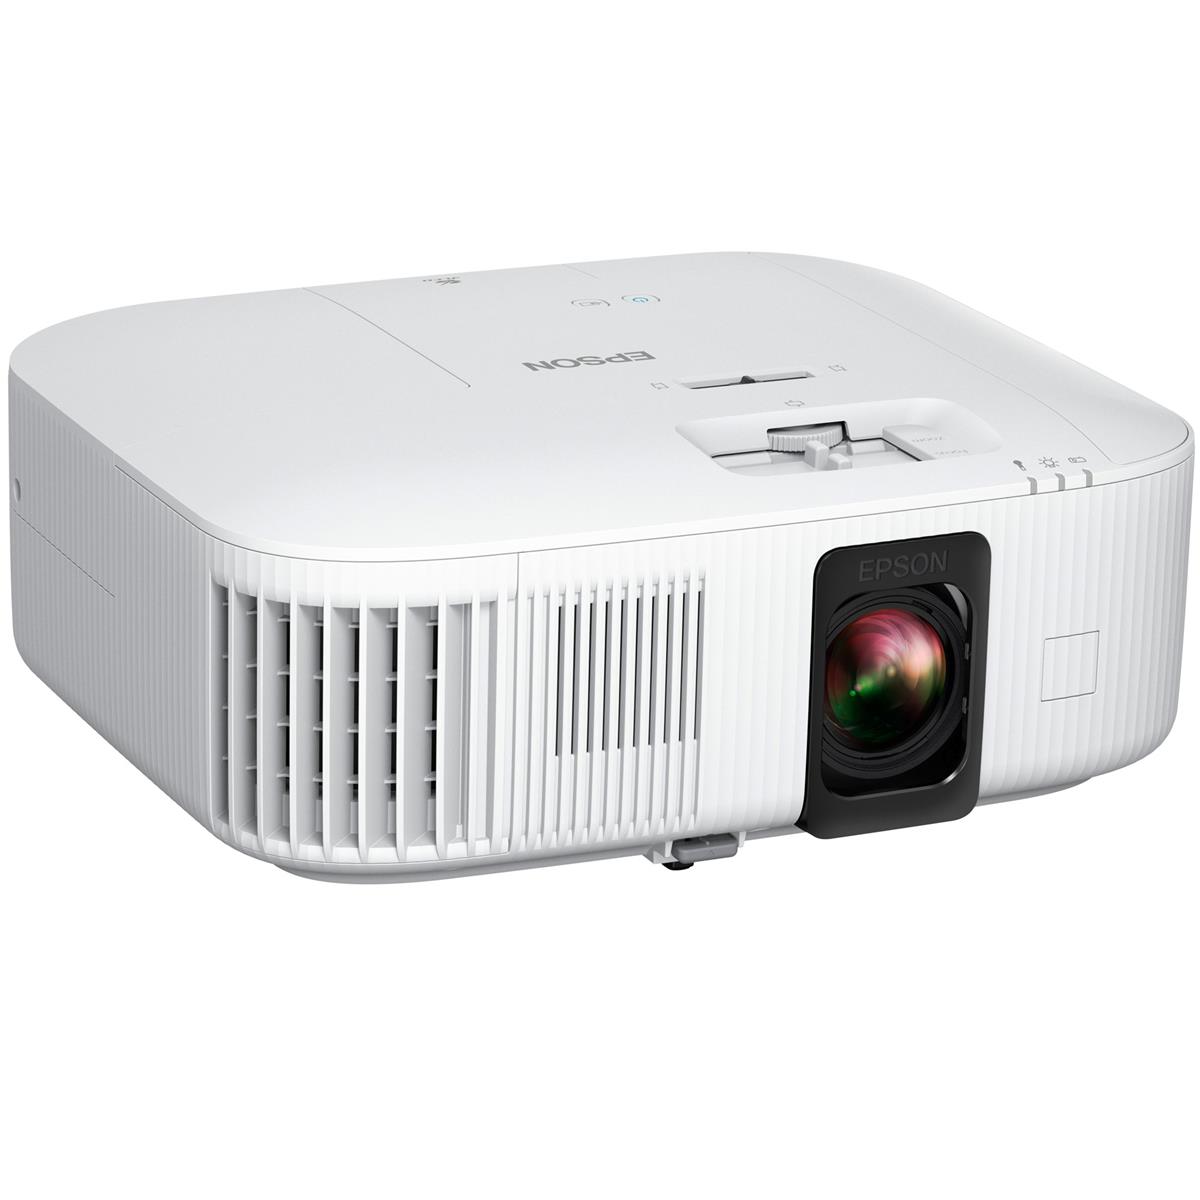 Image of Epson Home Cinema 2350 4K PRO-UHD 3-Chip 3LCD Smart Gaming Projector